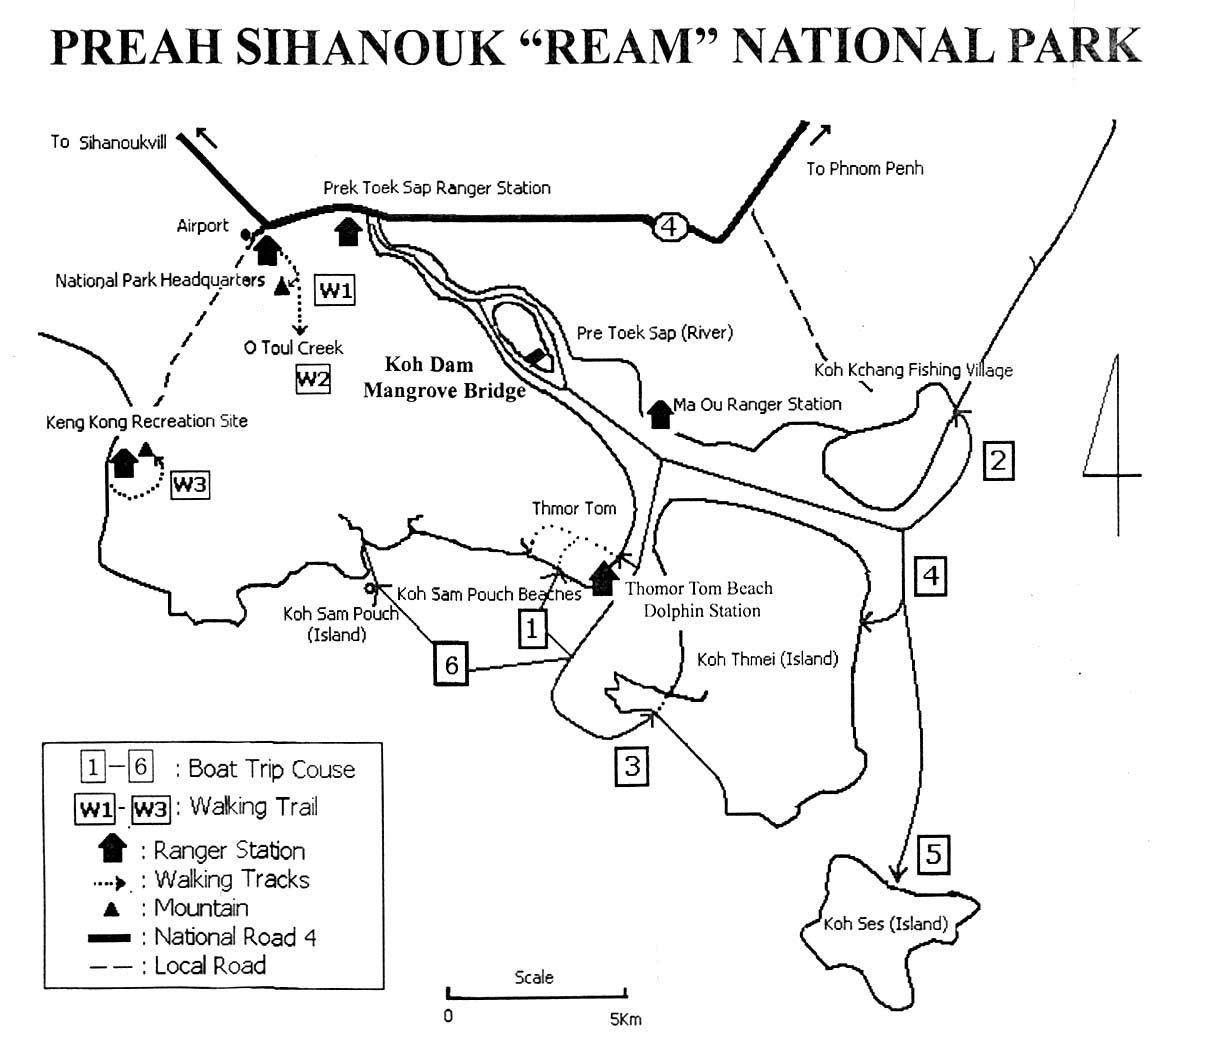 a map of ream national park in sihanoukville cambodia